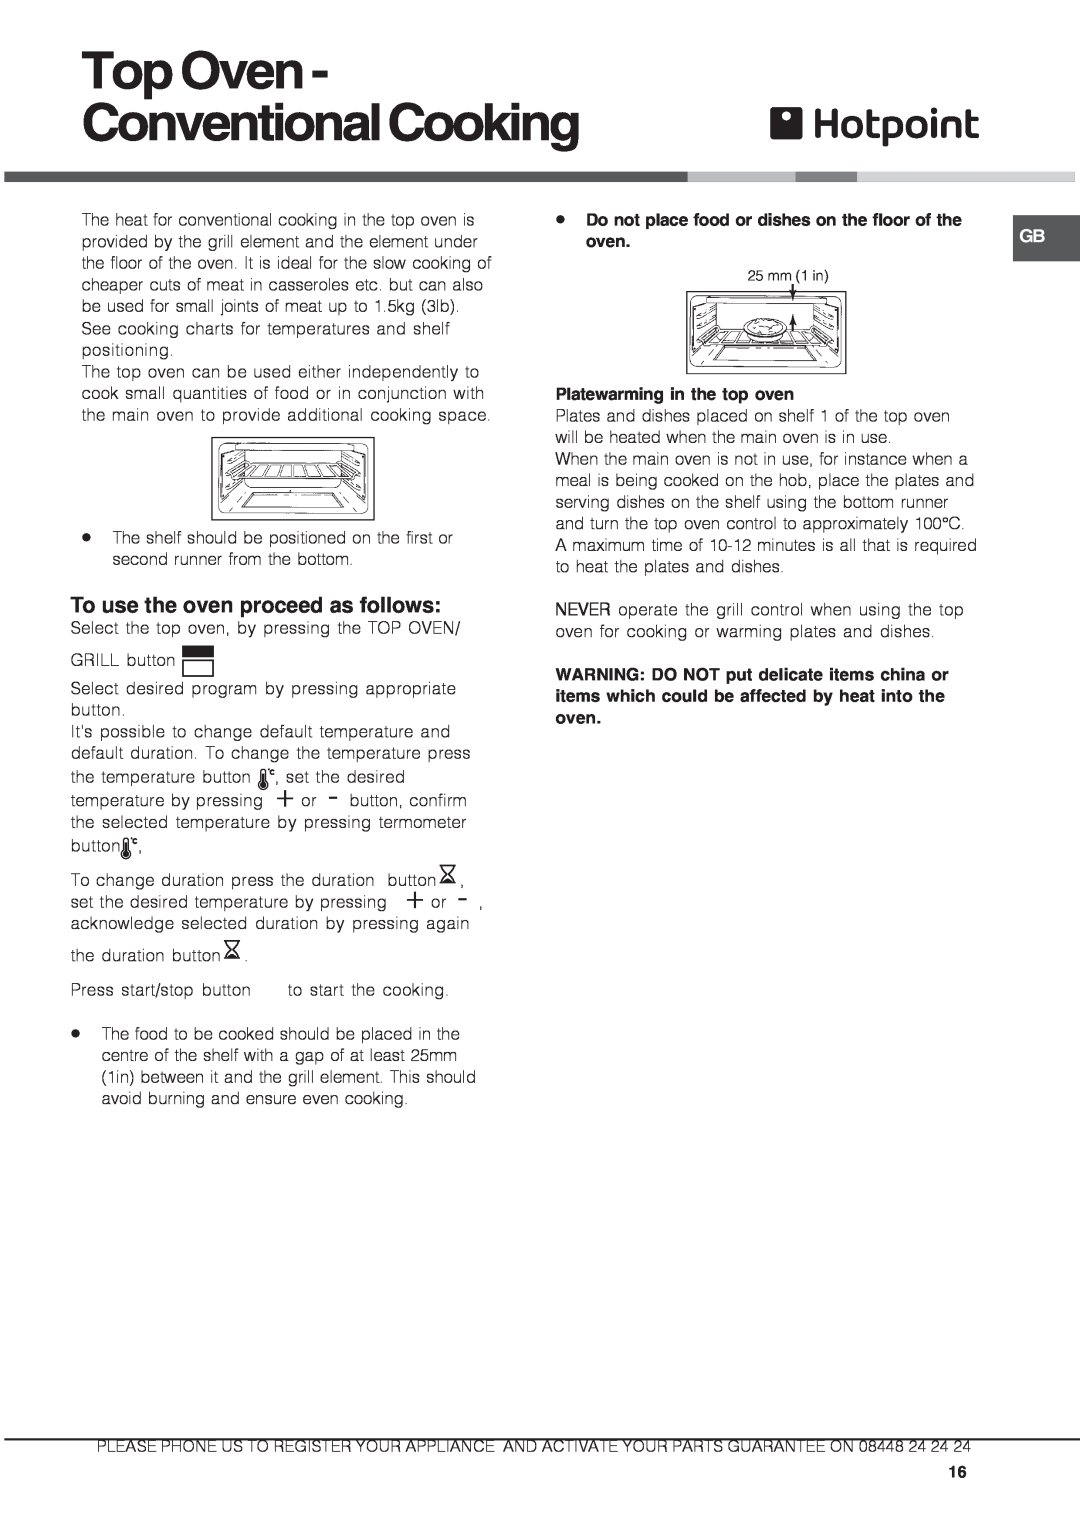 Hotpoint DX 1032 CX manual TopOven- ConventionalCooking, To use the oven proceed as follows, Platewarming in the top oven 